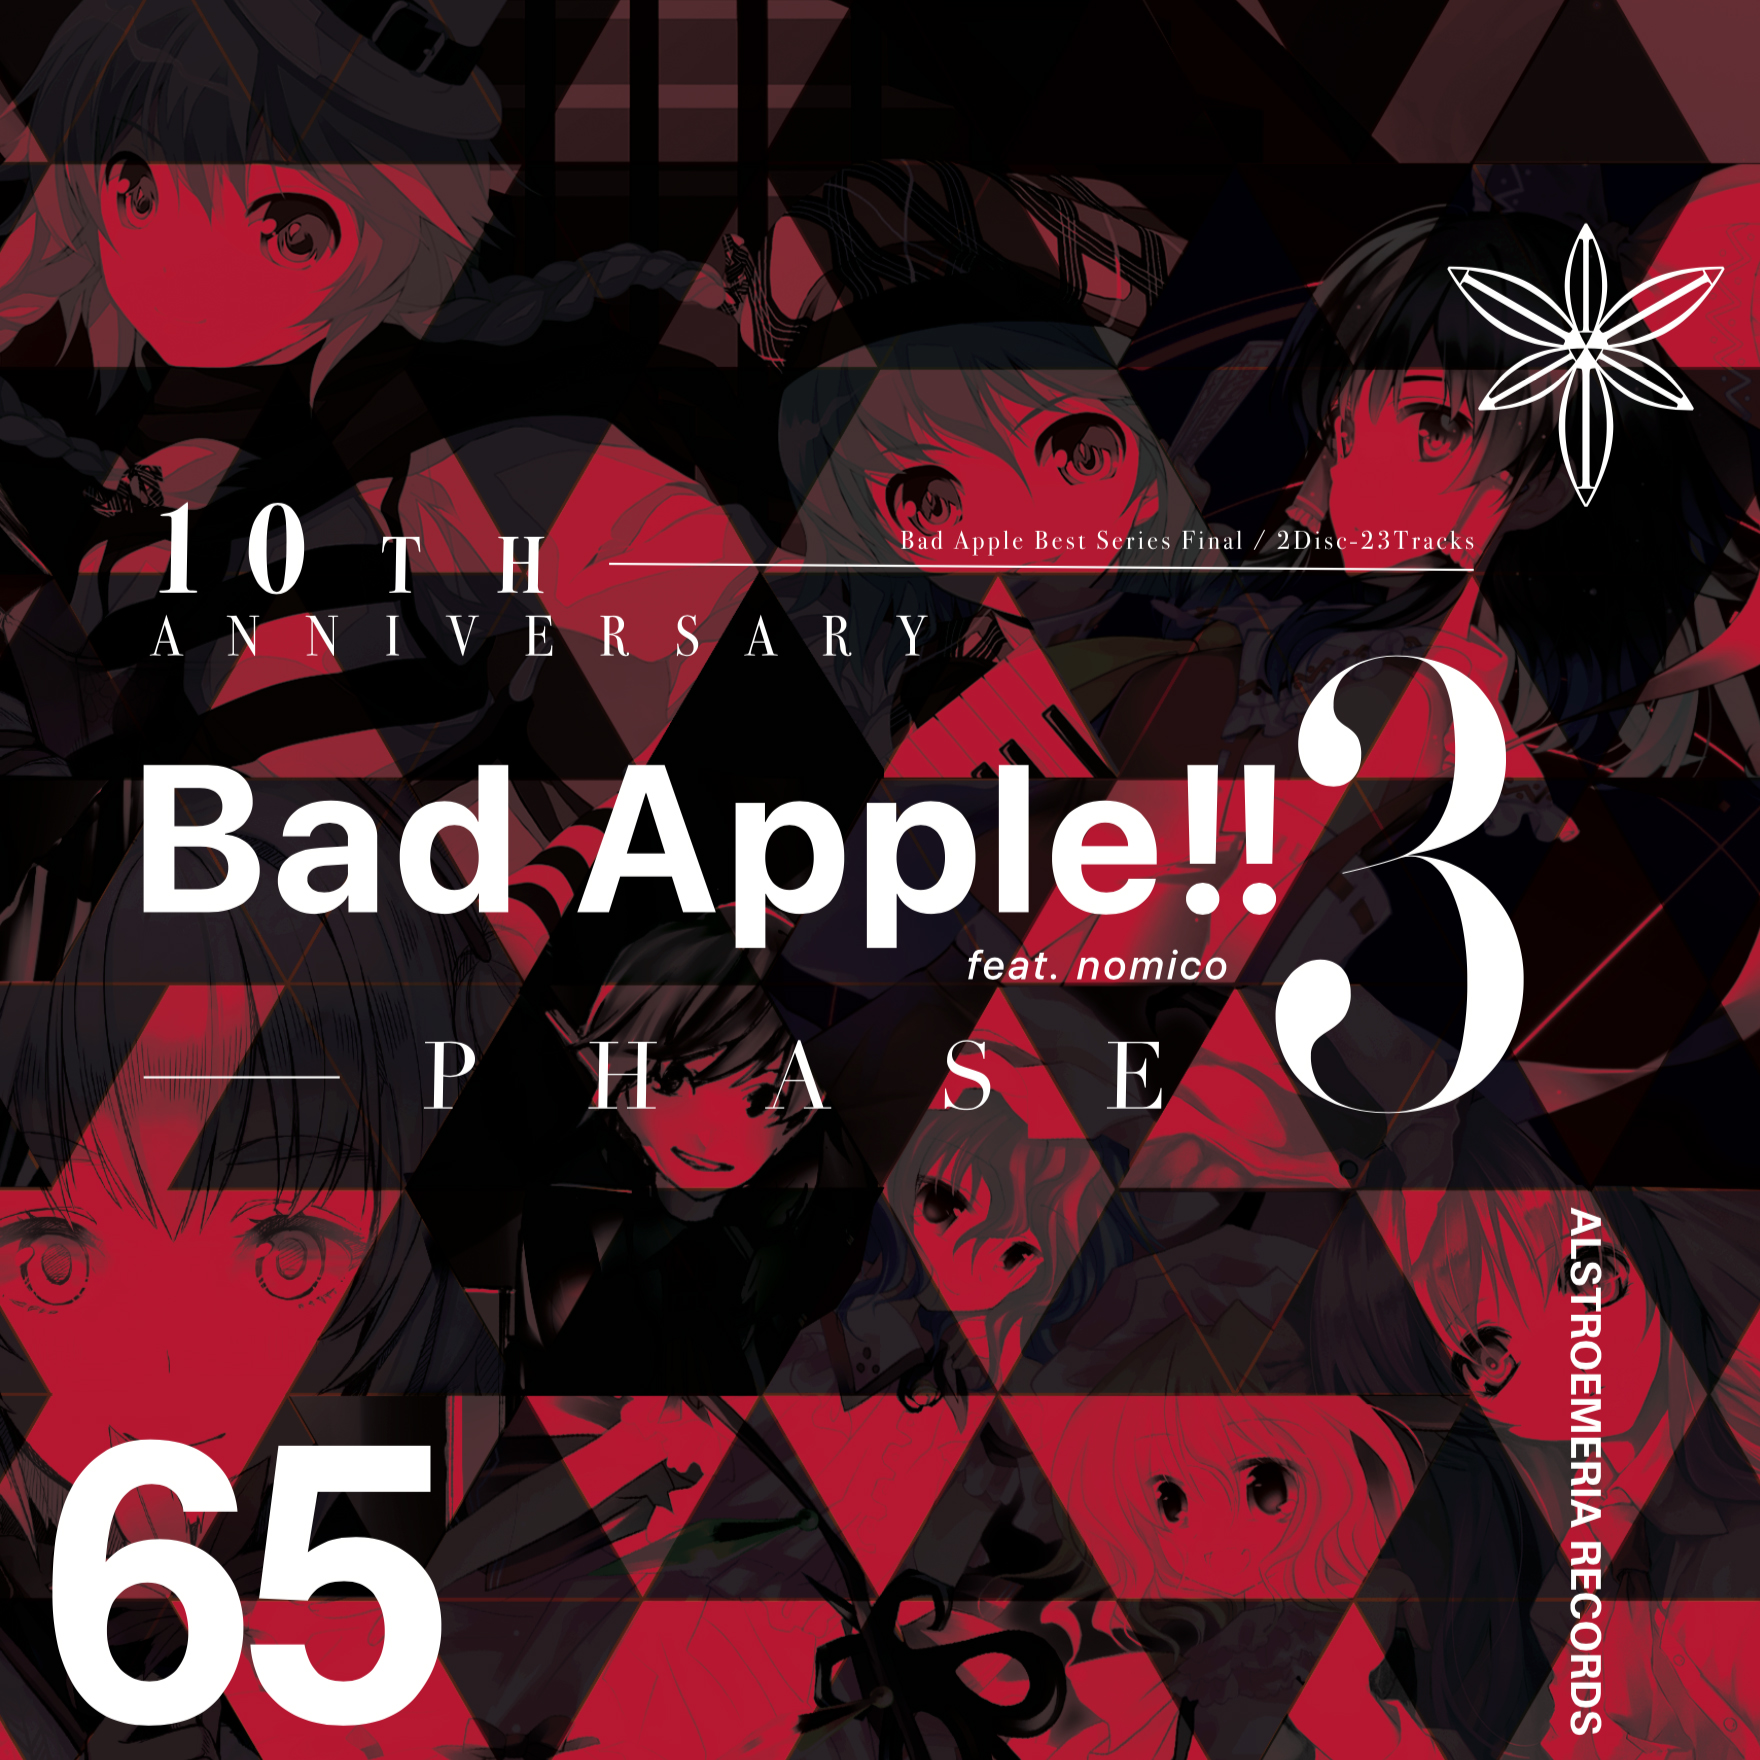 ARCD0065 / 10th Anniversary Bad Apple!! feat.nomico PHASE 3